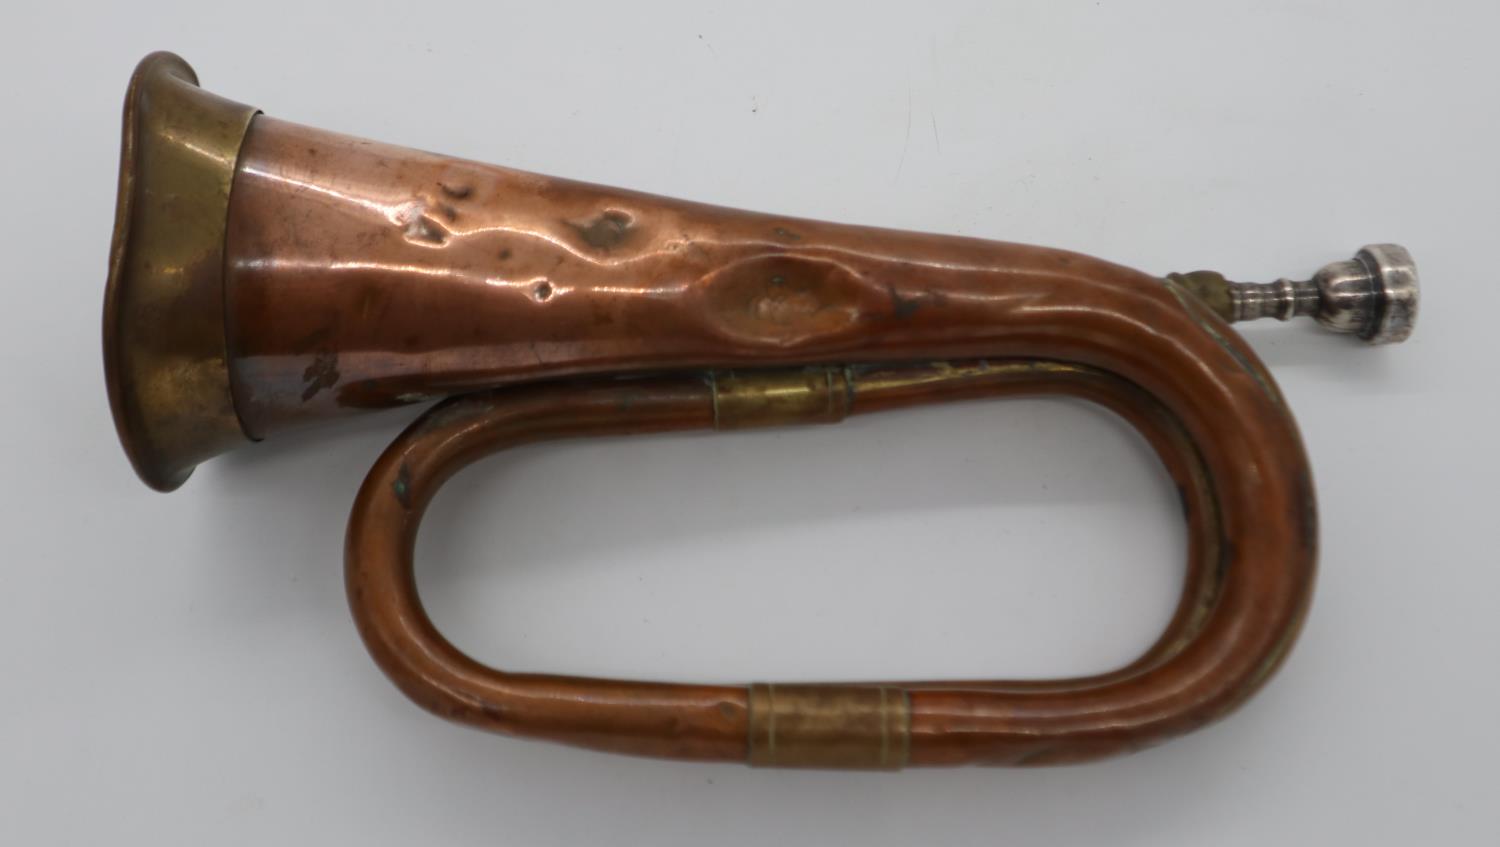 British WWII period military bugle. UK P&P Group 2 (£20+VAT for the first lot and £4+VAT for